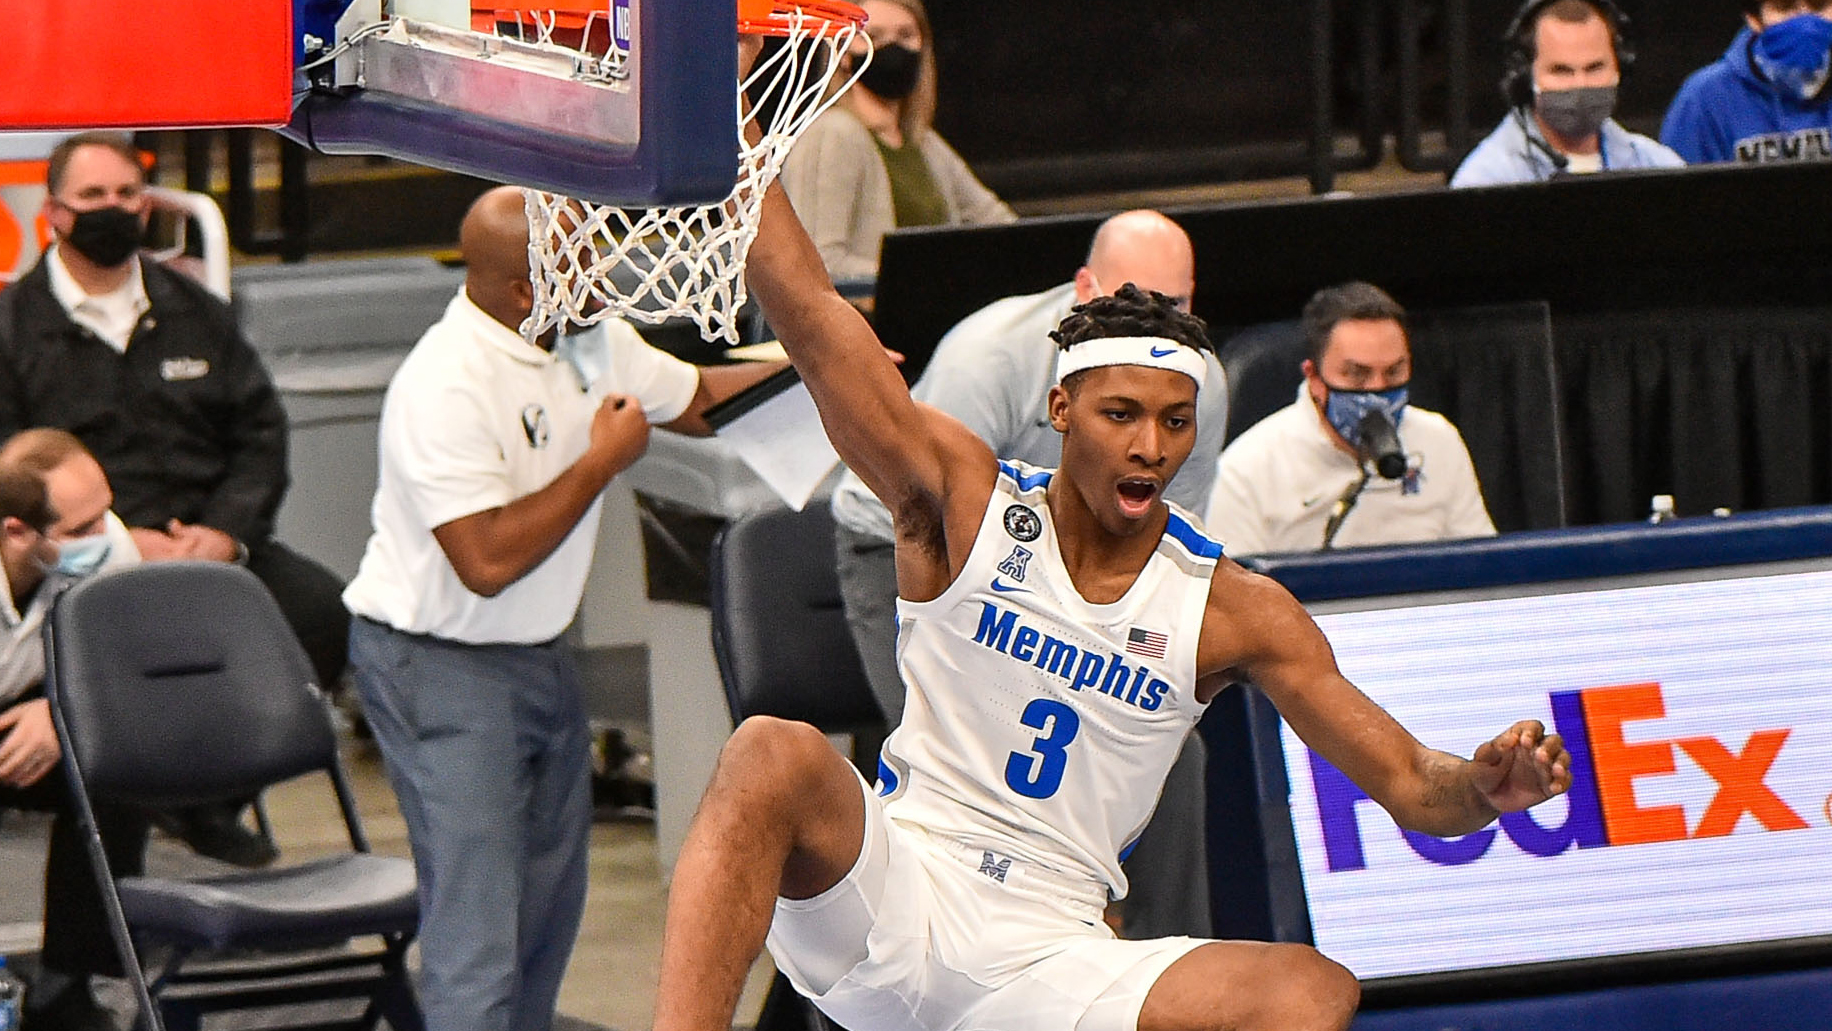 Landers Nolley scores 27 points, Memphis makes 14 3s in win vs. Colorado  State in NIT semis - College Basketball | NBC Sports